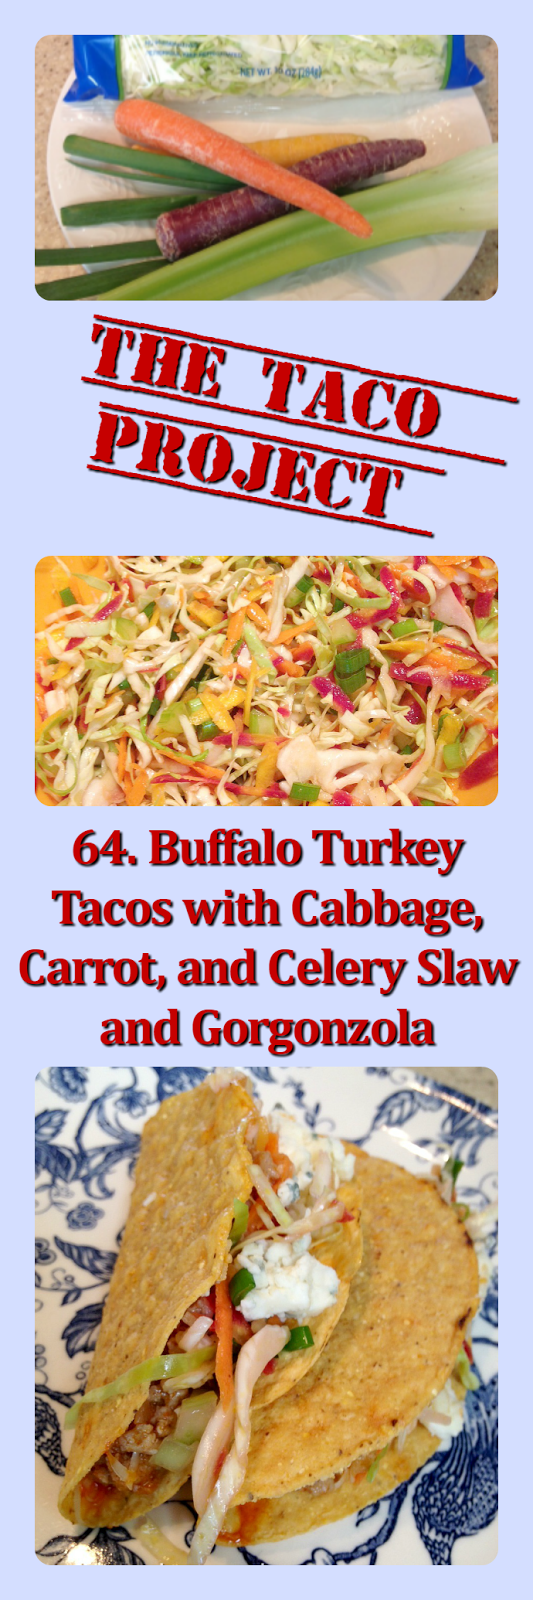 Buffalo Turkey Tacos with Cabbage, Carrot, and Celery Slaw and Gorgonzola Collage